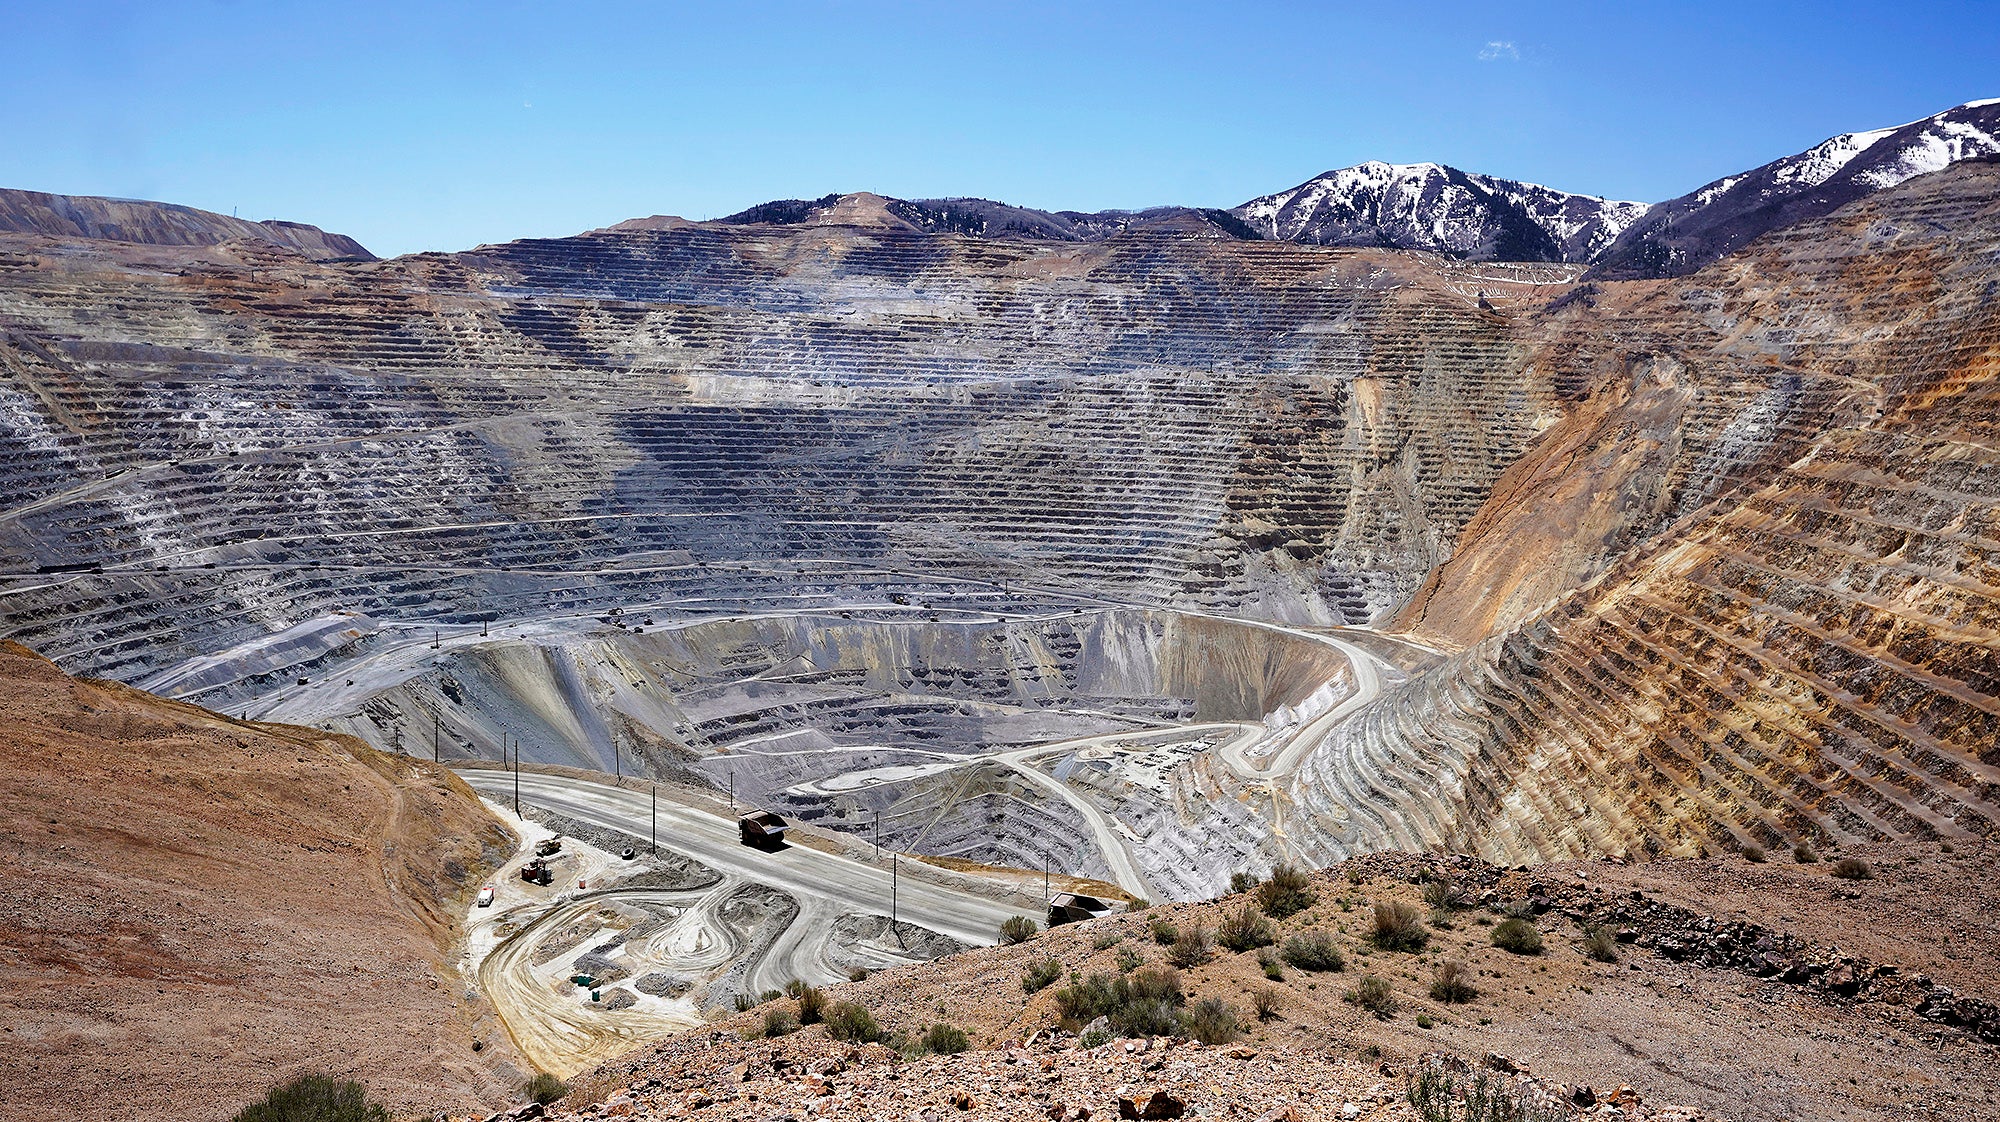 The Kennecott's Bingham Canyon Copper Mine in Herriman, Utah. Rio Tinto will begin manufacturing tellurium, a rare mineral used in solar panels that used to be discarded along with the other mine tailings, at the Kennecott refinery.